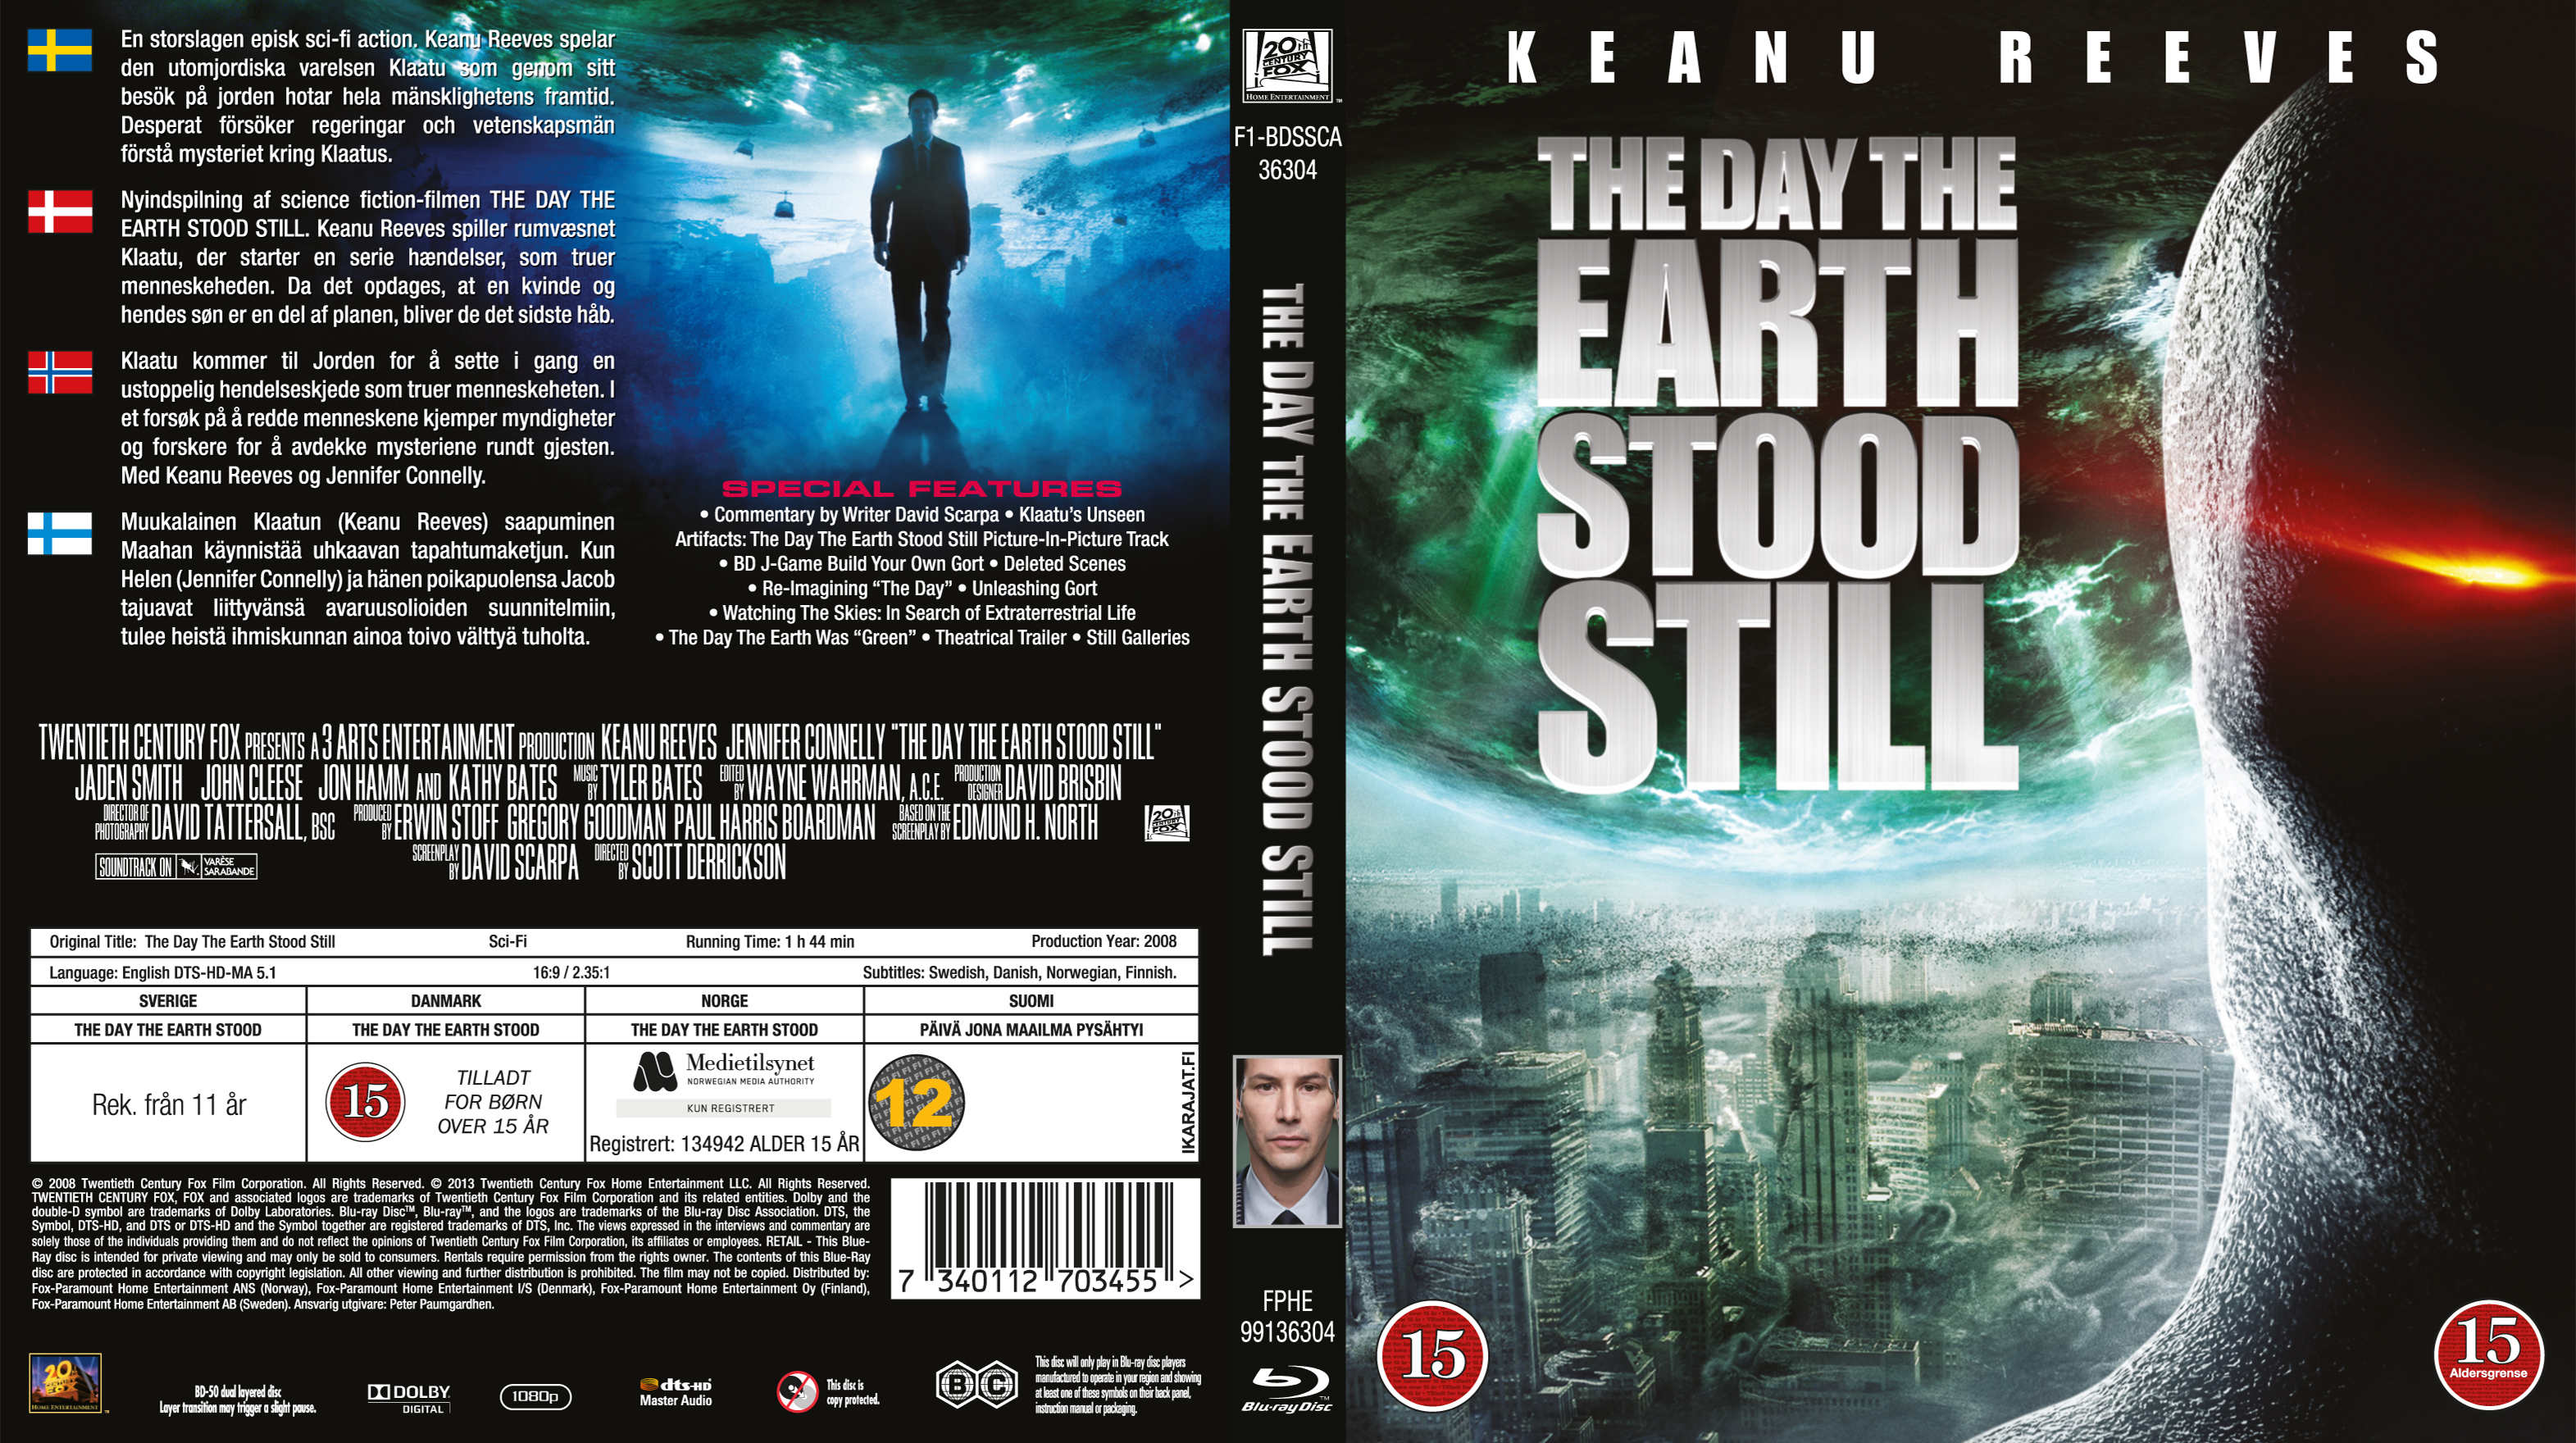 Covers Box Sk The Day Earth Stood Still Nordic Blu Ray 2008 High Quality Dv...